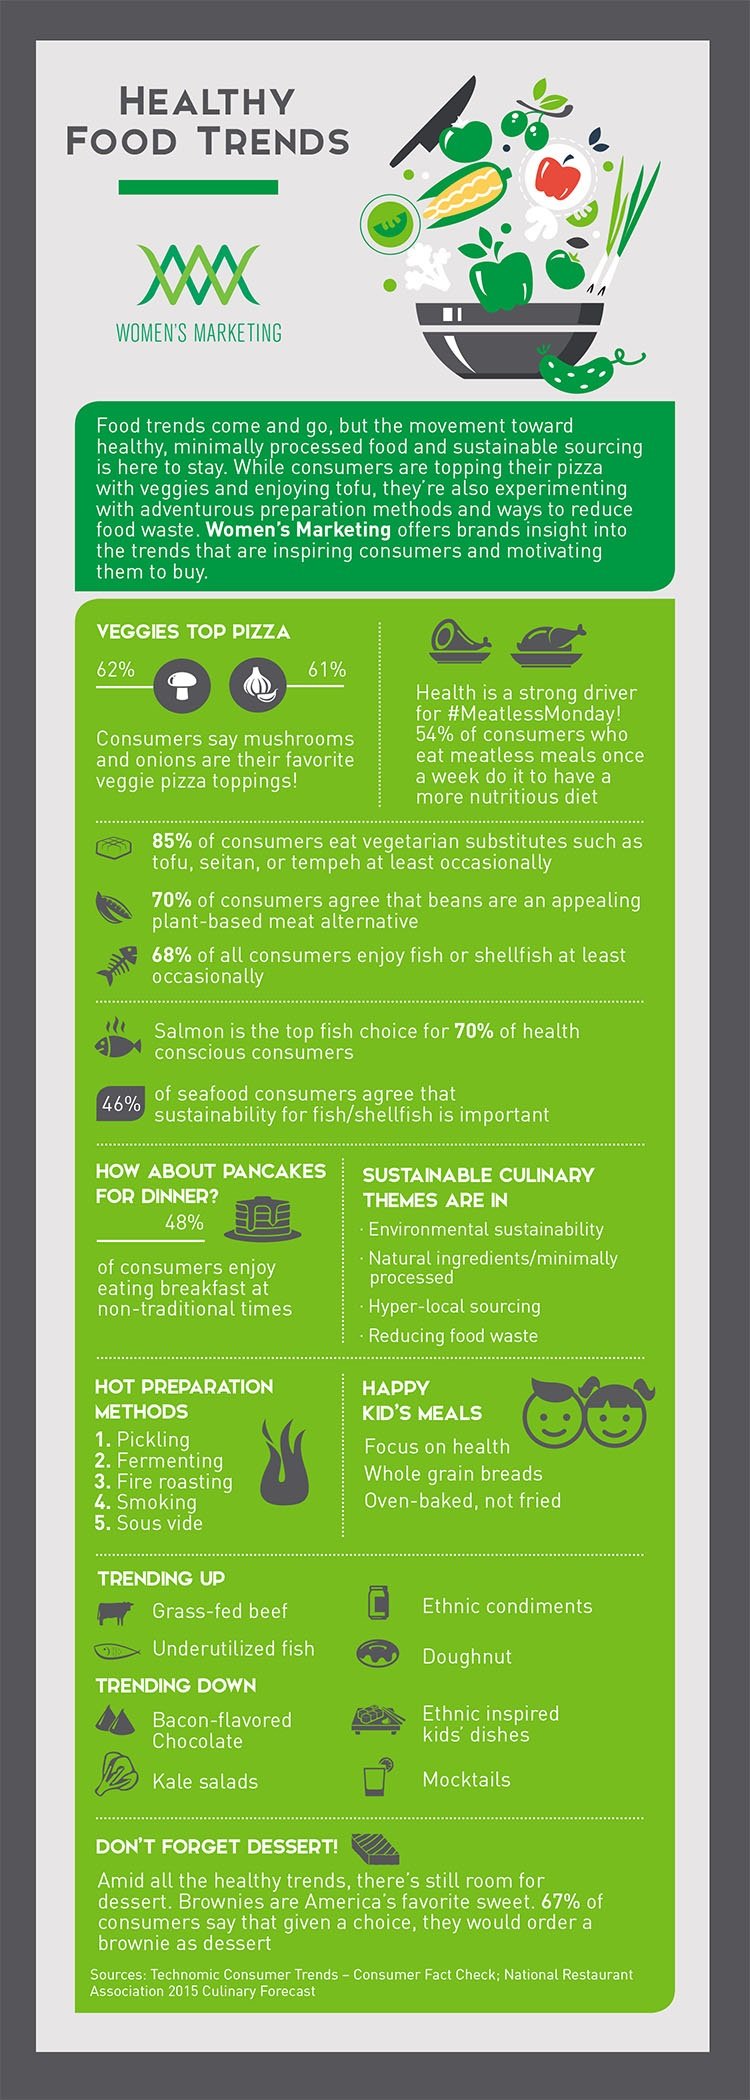 HealthyFoodTrends_Infographic